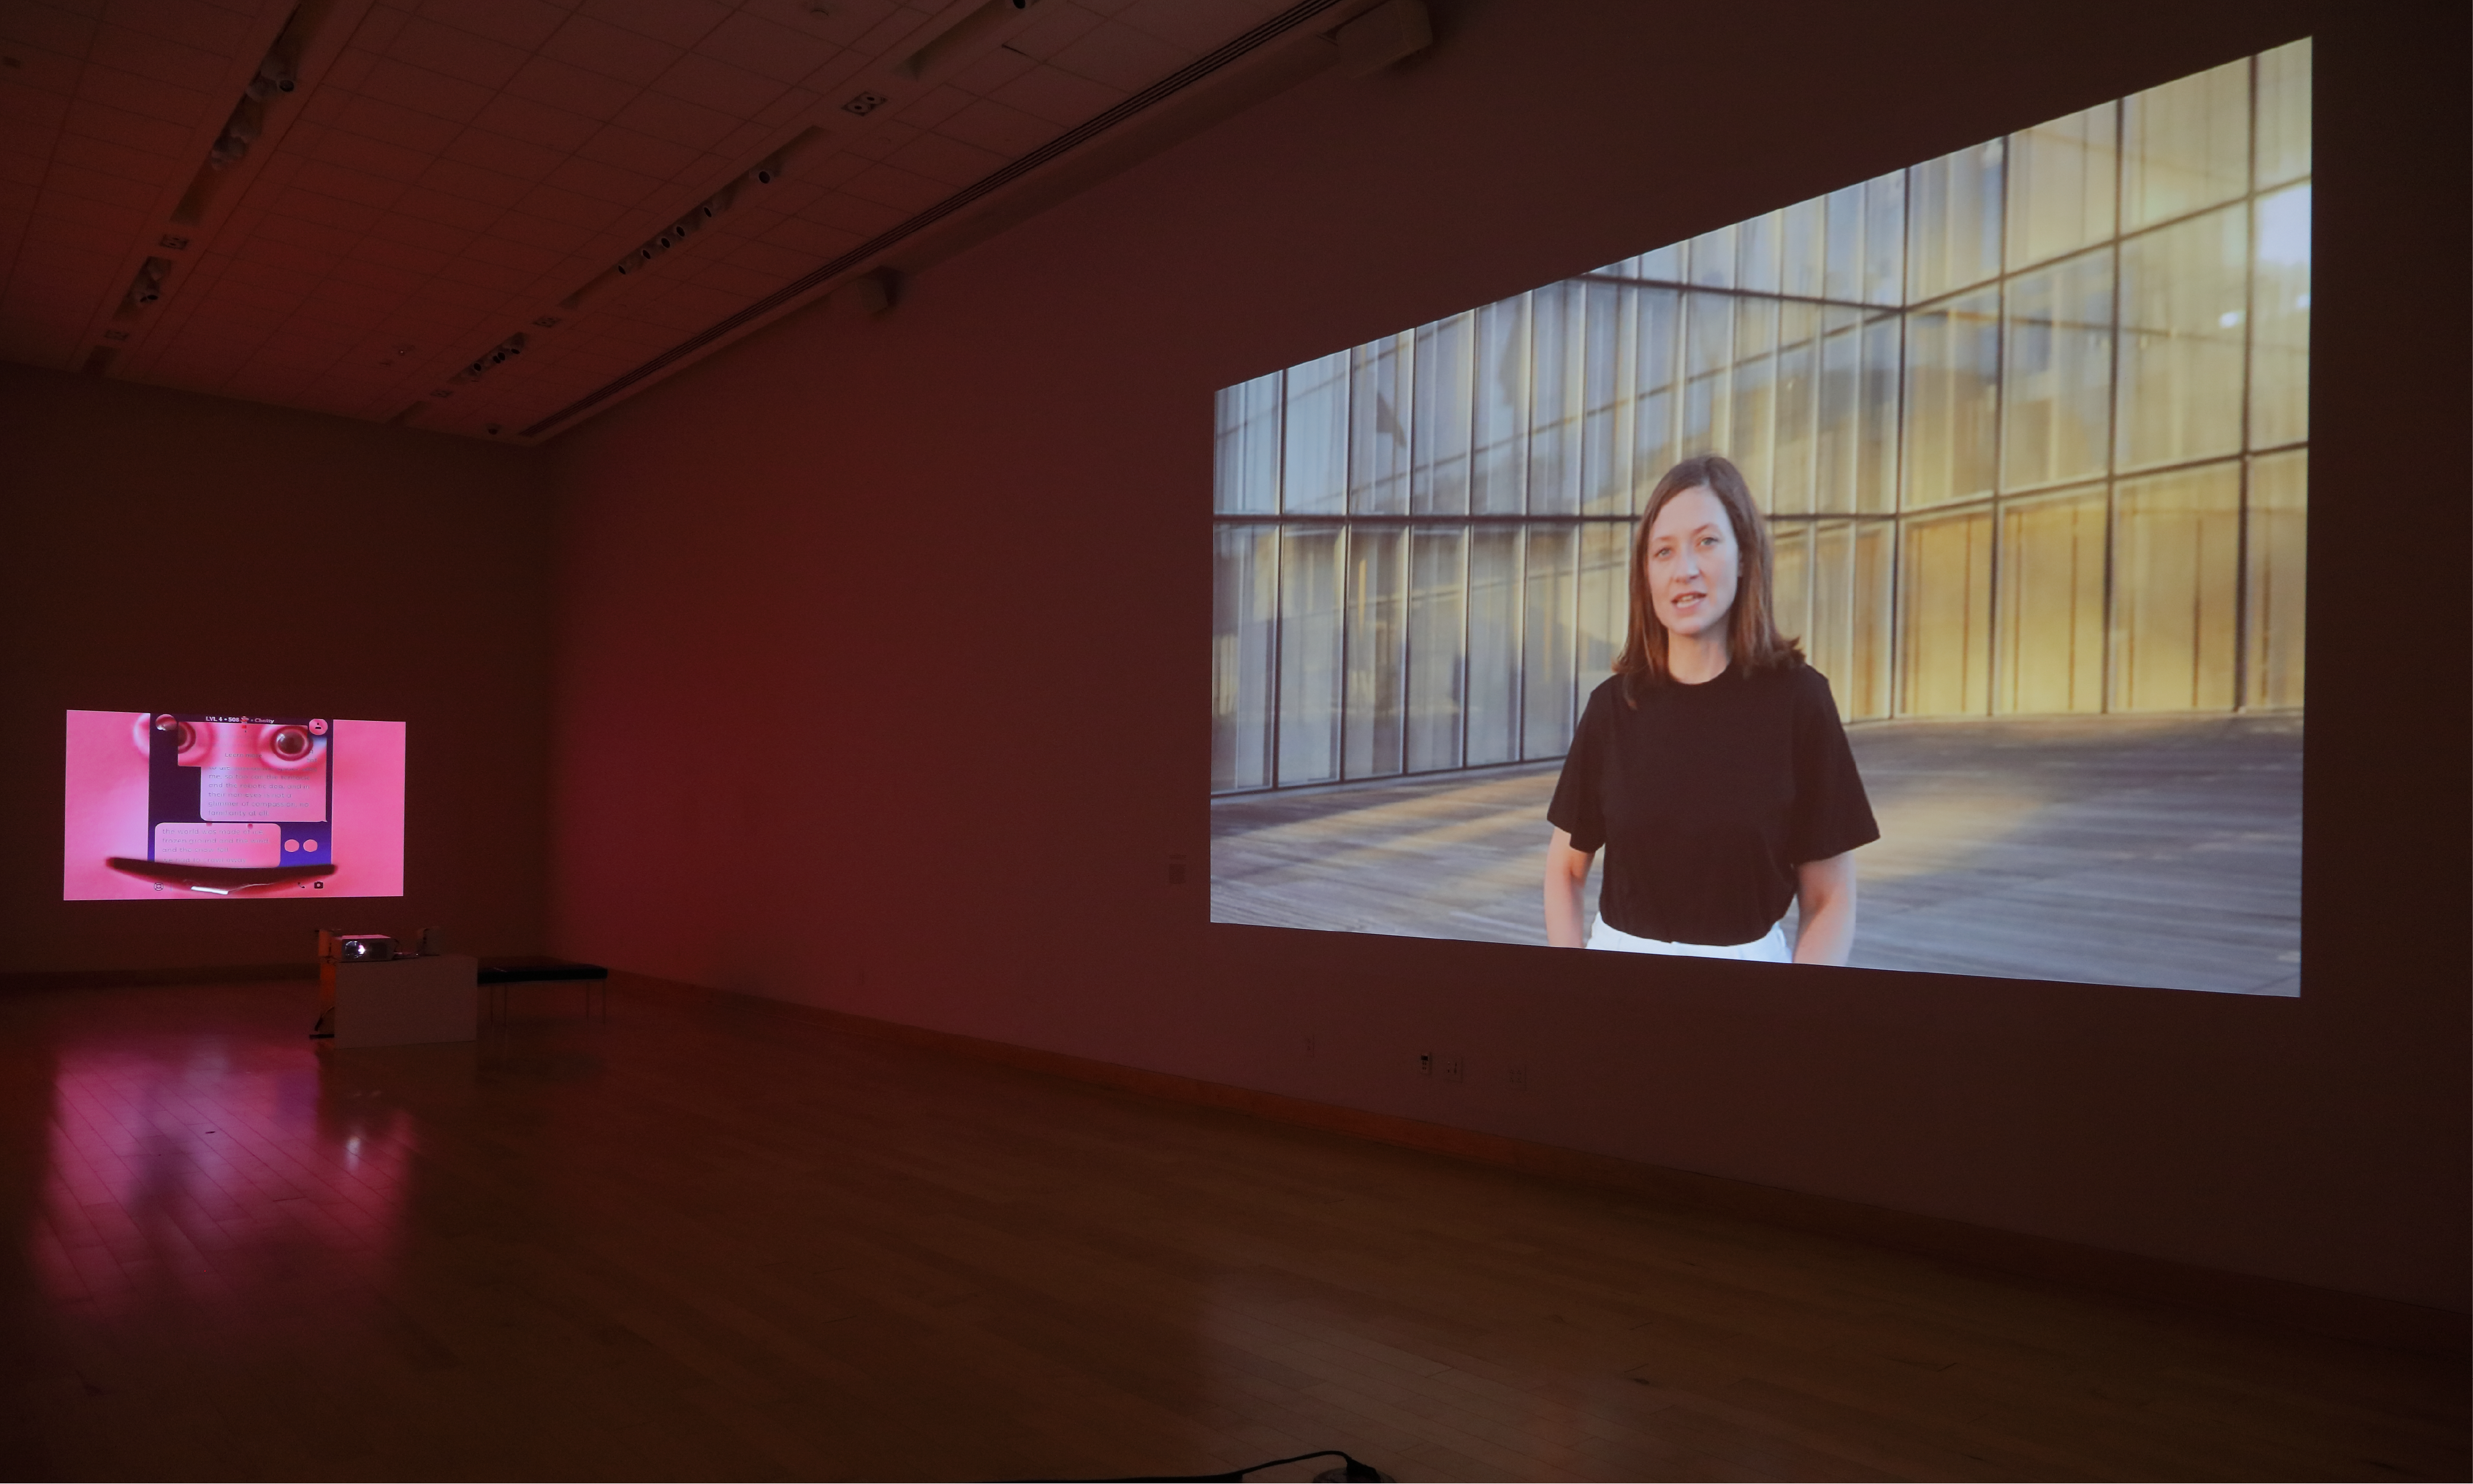 A still of a woman speaking in front of a glass building is projected onto a wall on the right and on the left is a pink projection of an artwork. The work features human eyes and text messages.